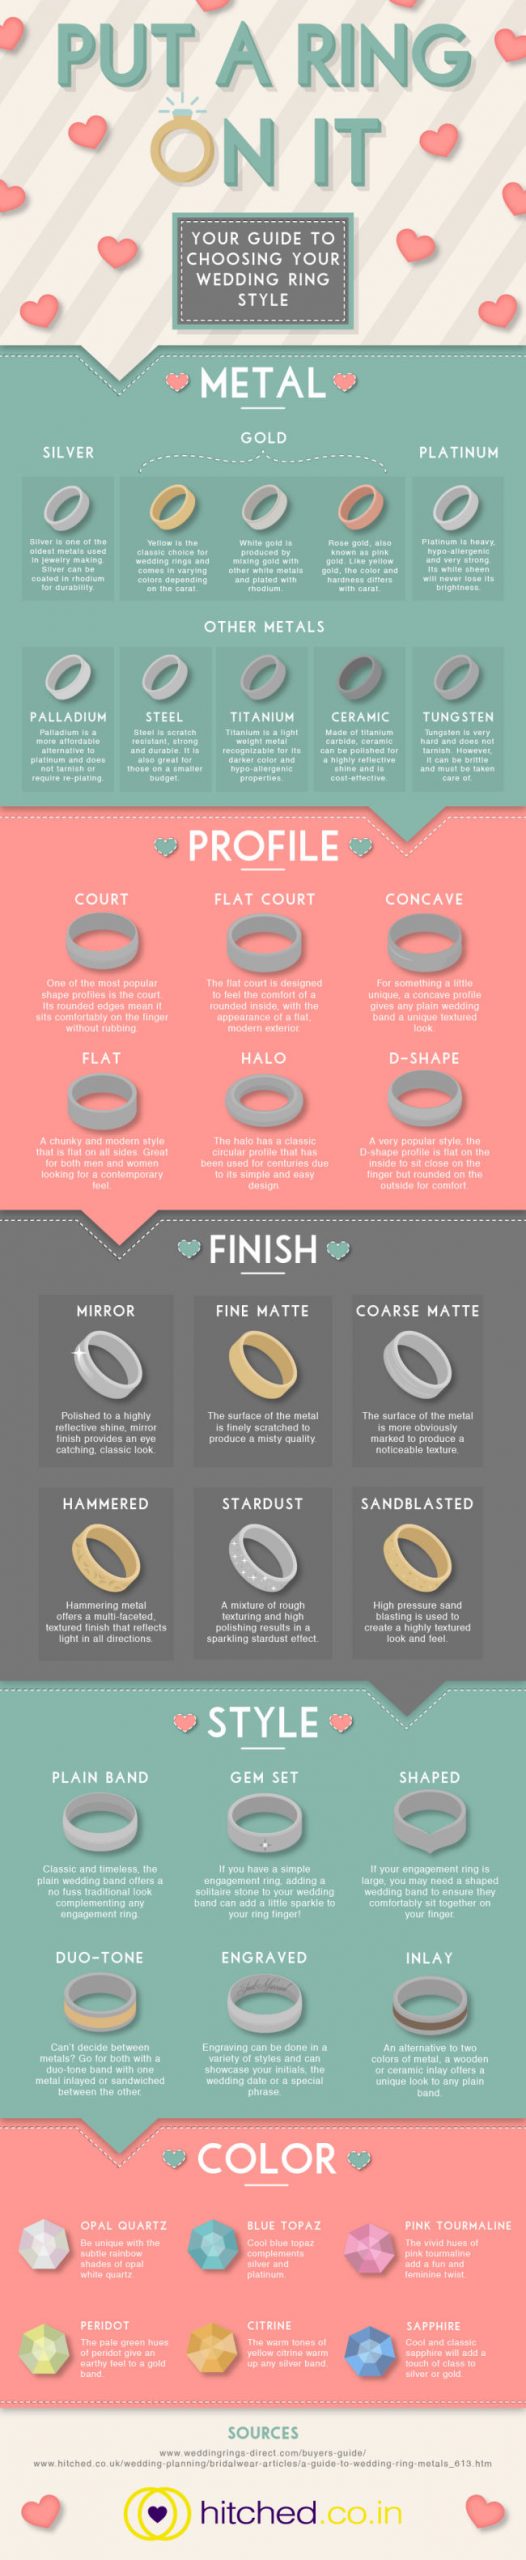 Different types of mens wedding rings